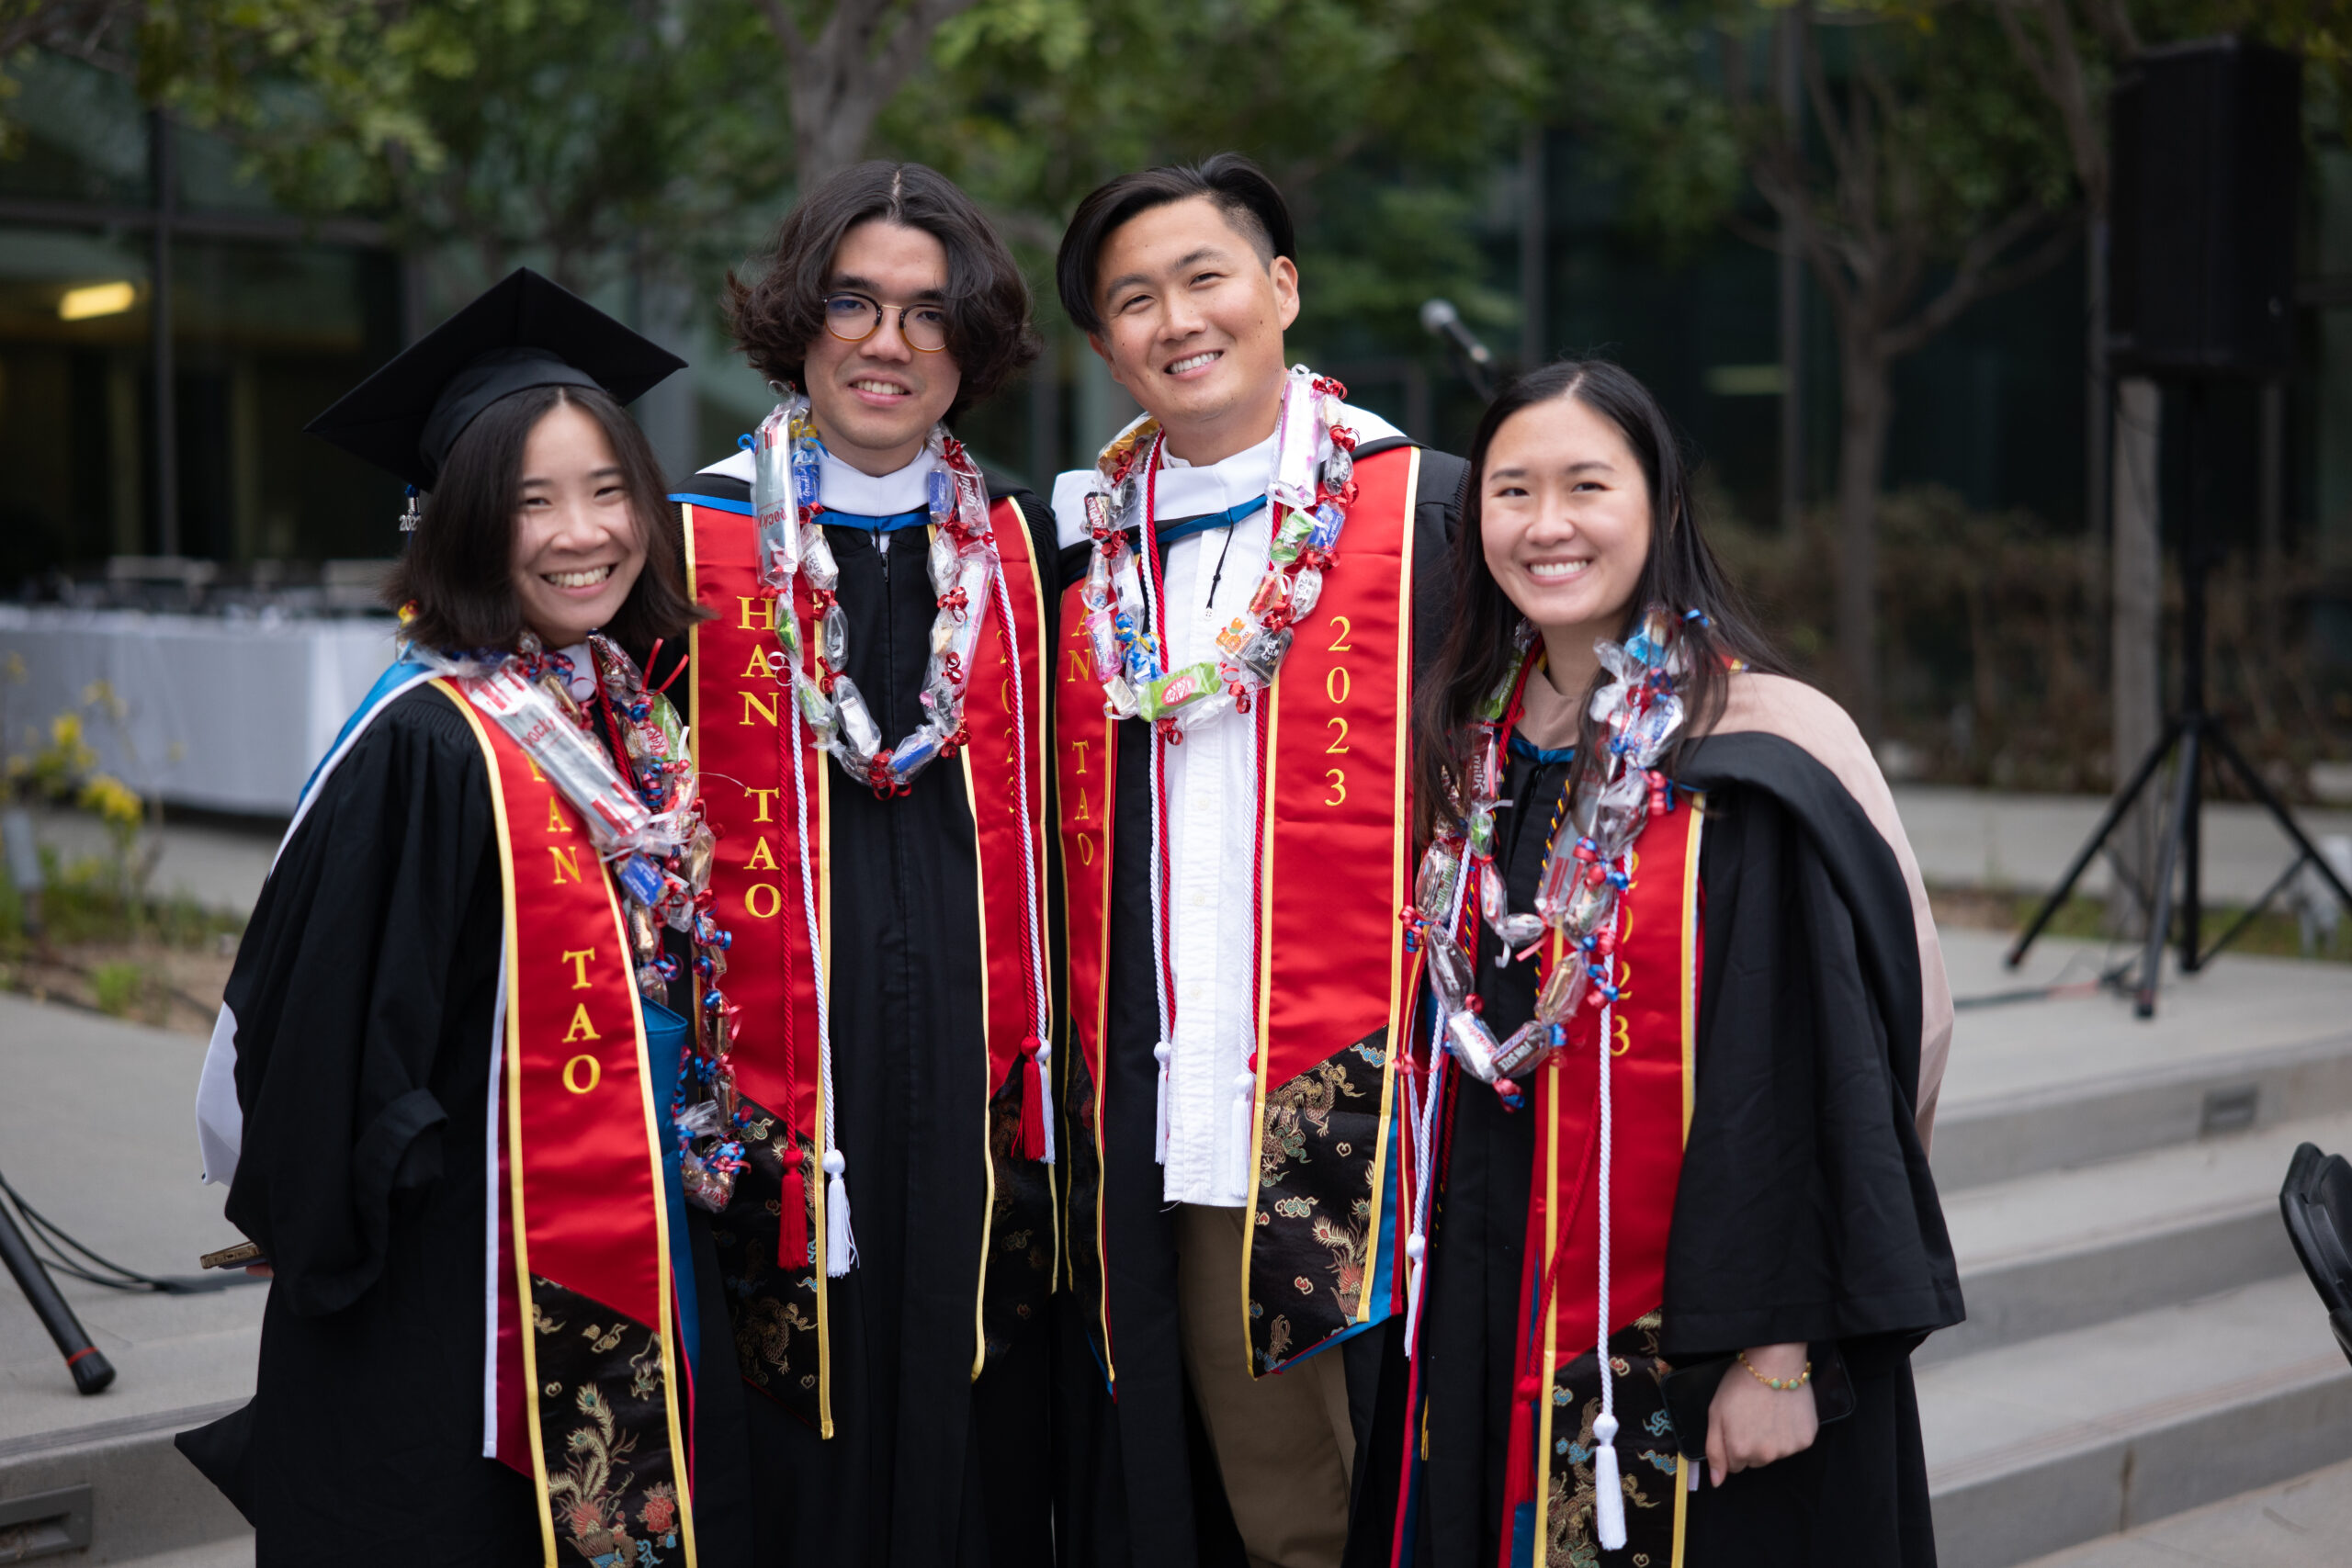 Students wearing regalia and Han Tao red stoles participate stand outside at API Graduation.